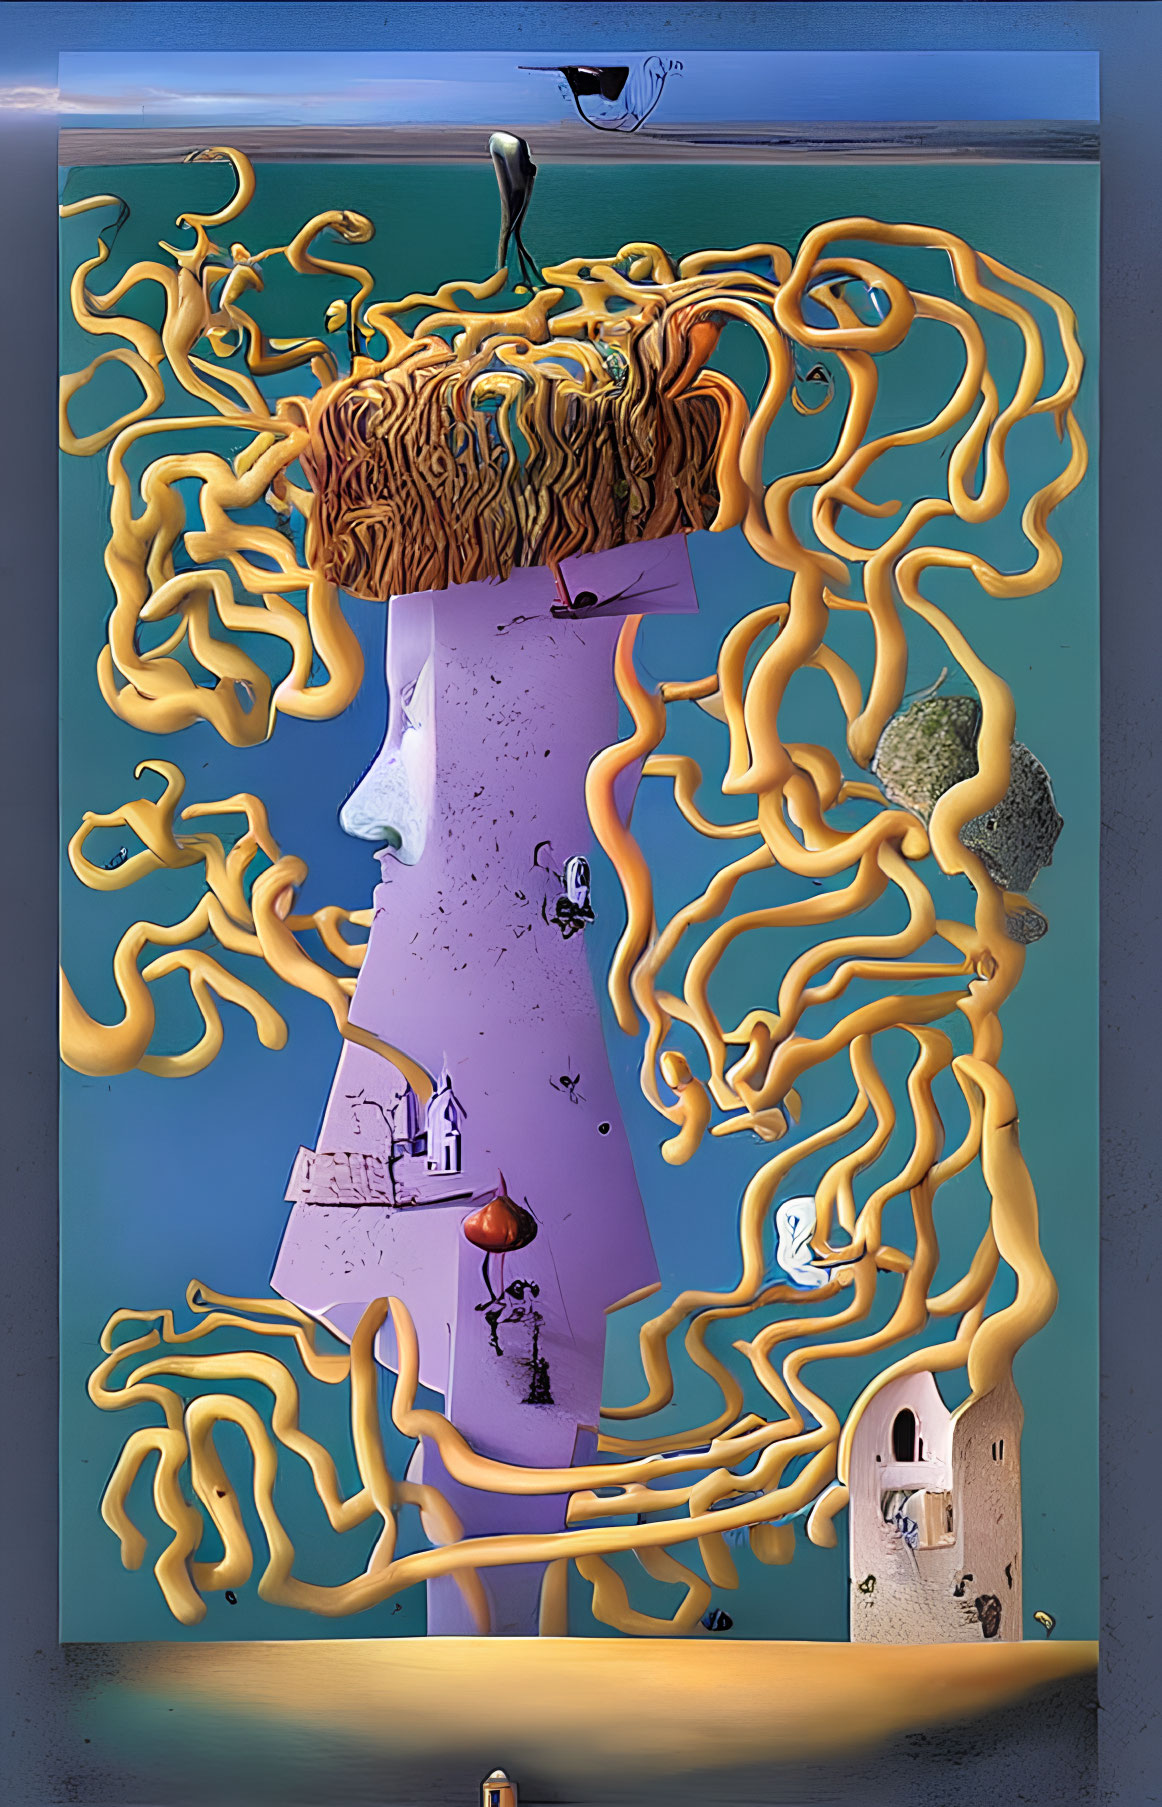 Surrealist artwork: Face profile with noodle-like hair and whimsical structures on blue gradient.